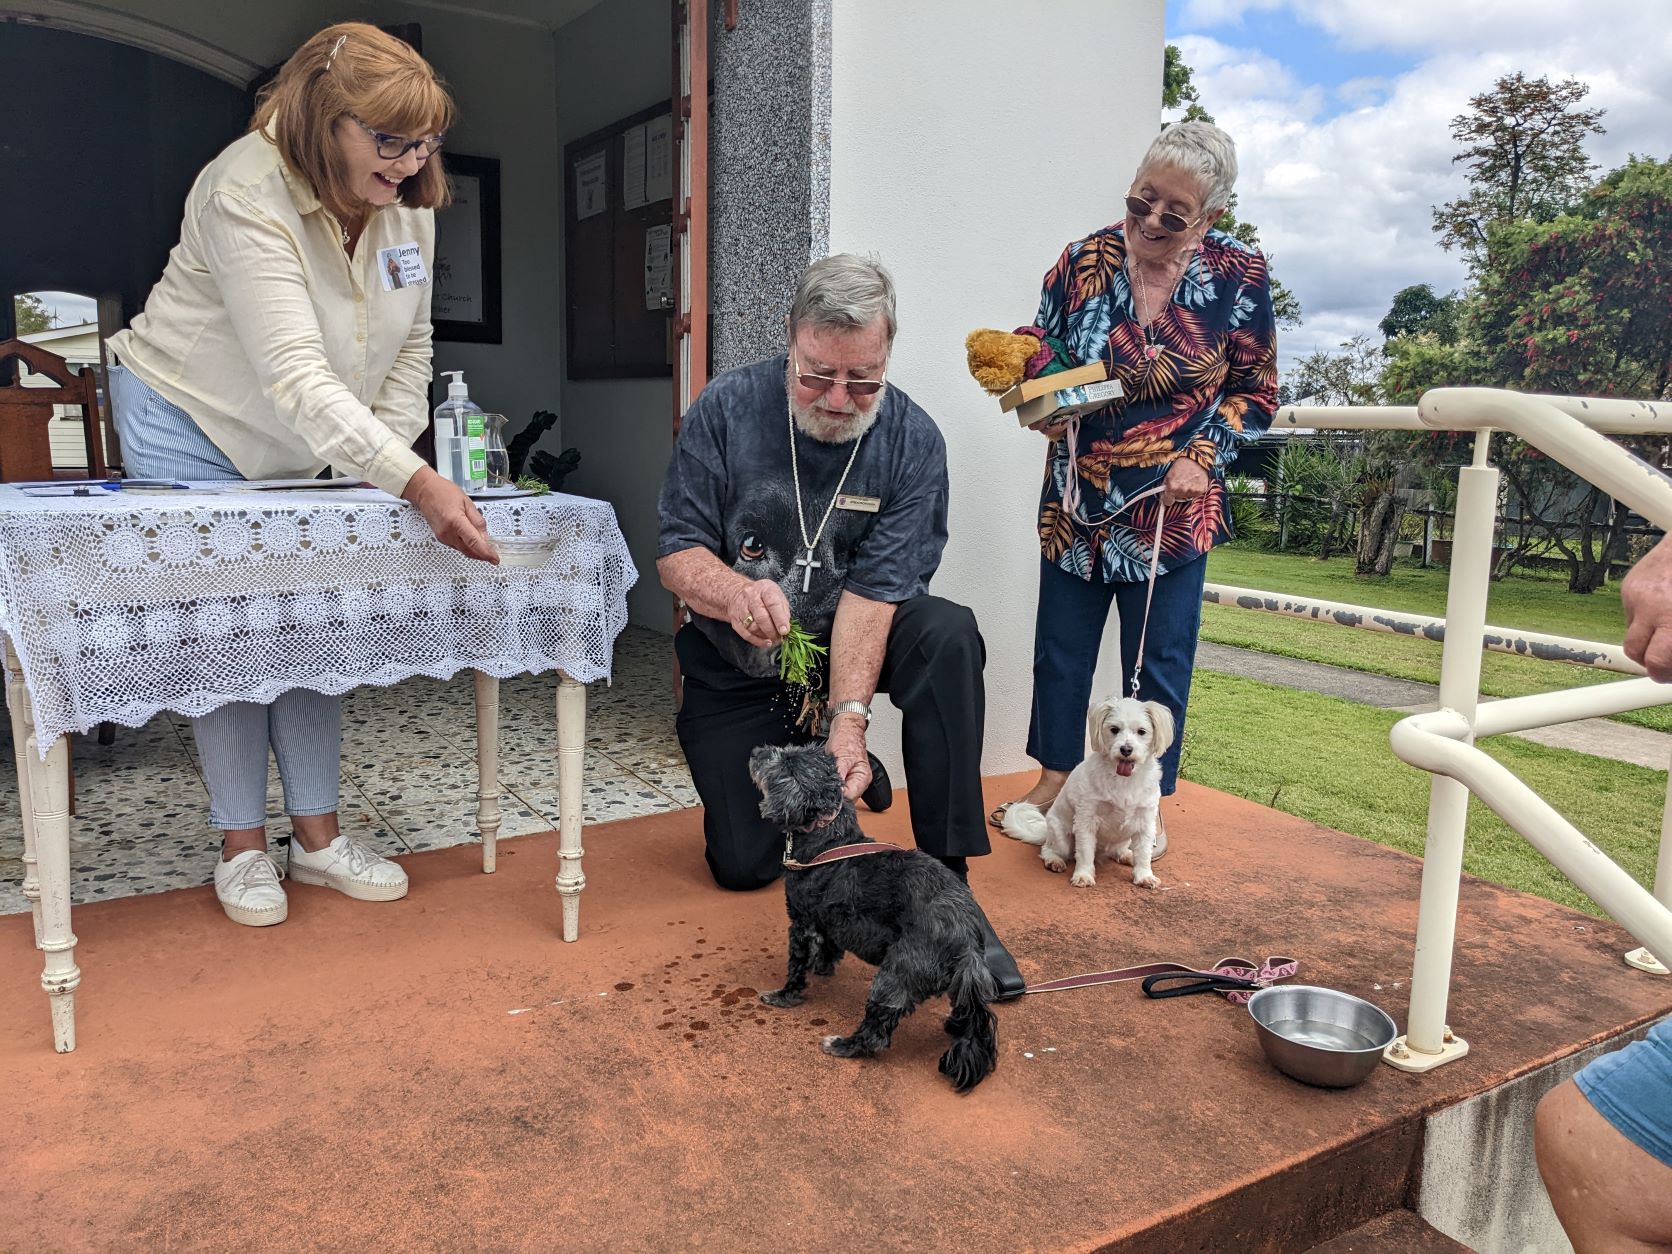 2022's St Francis of Assisi Day was celebrated at St Thomas’, Beaudesert